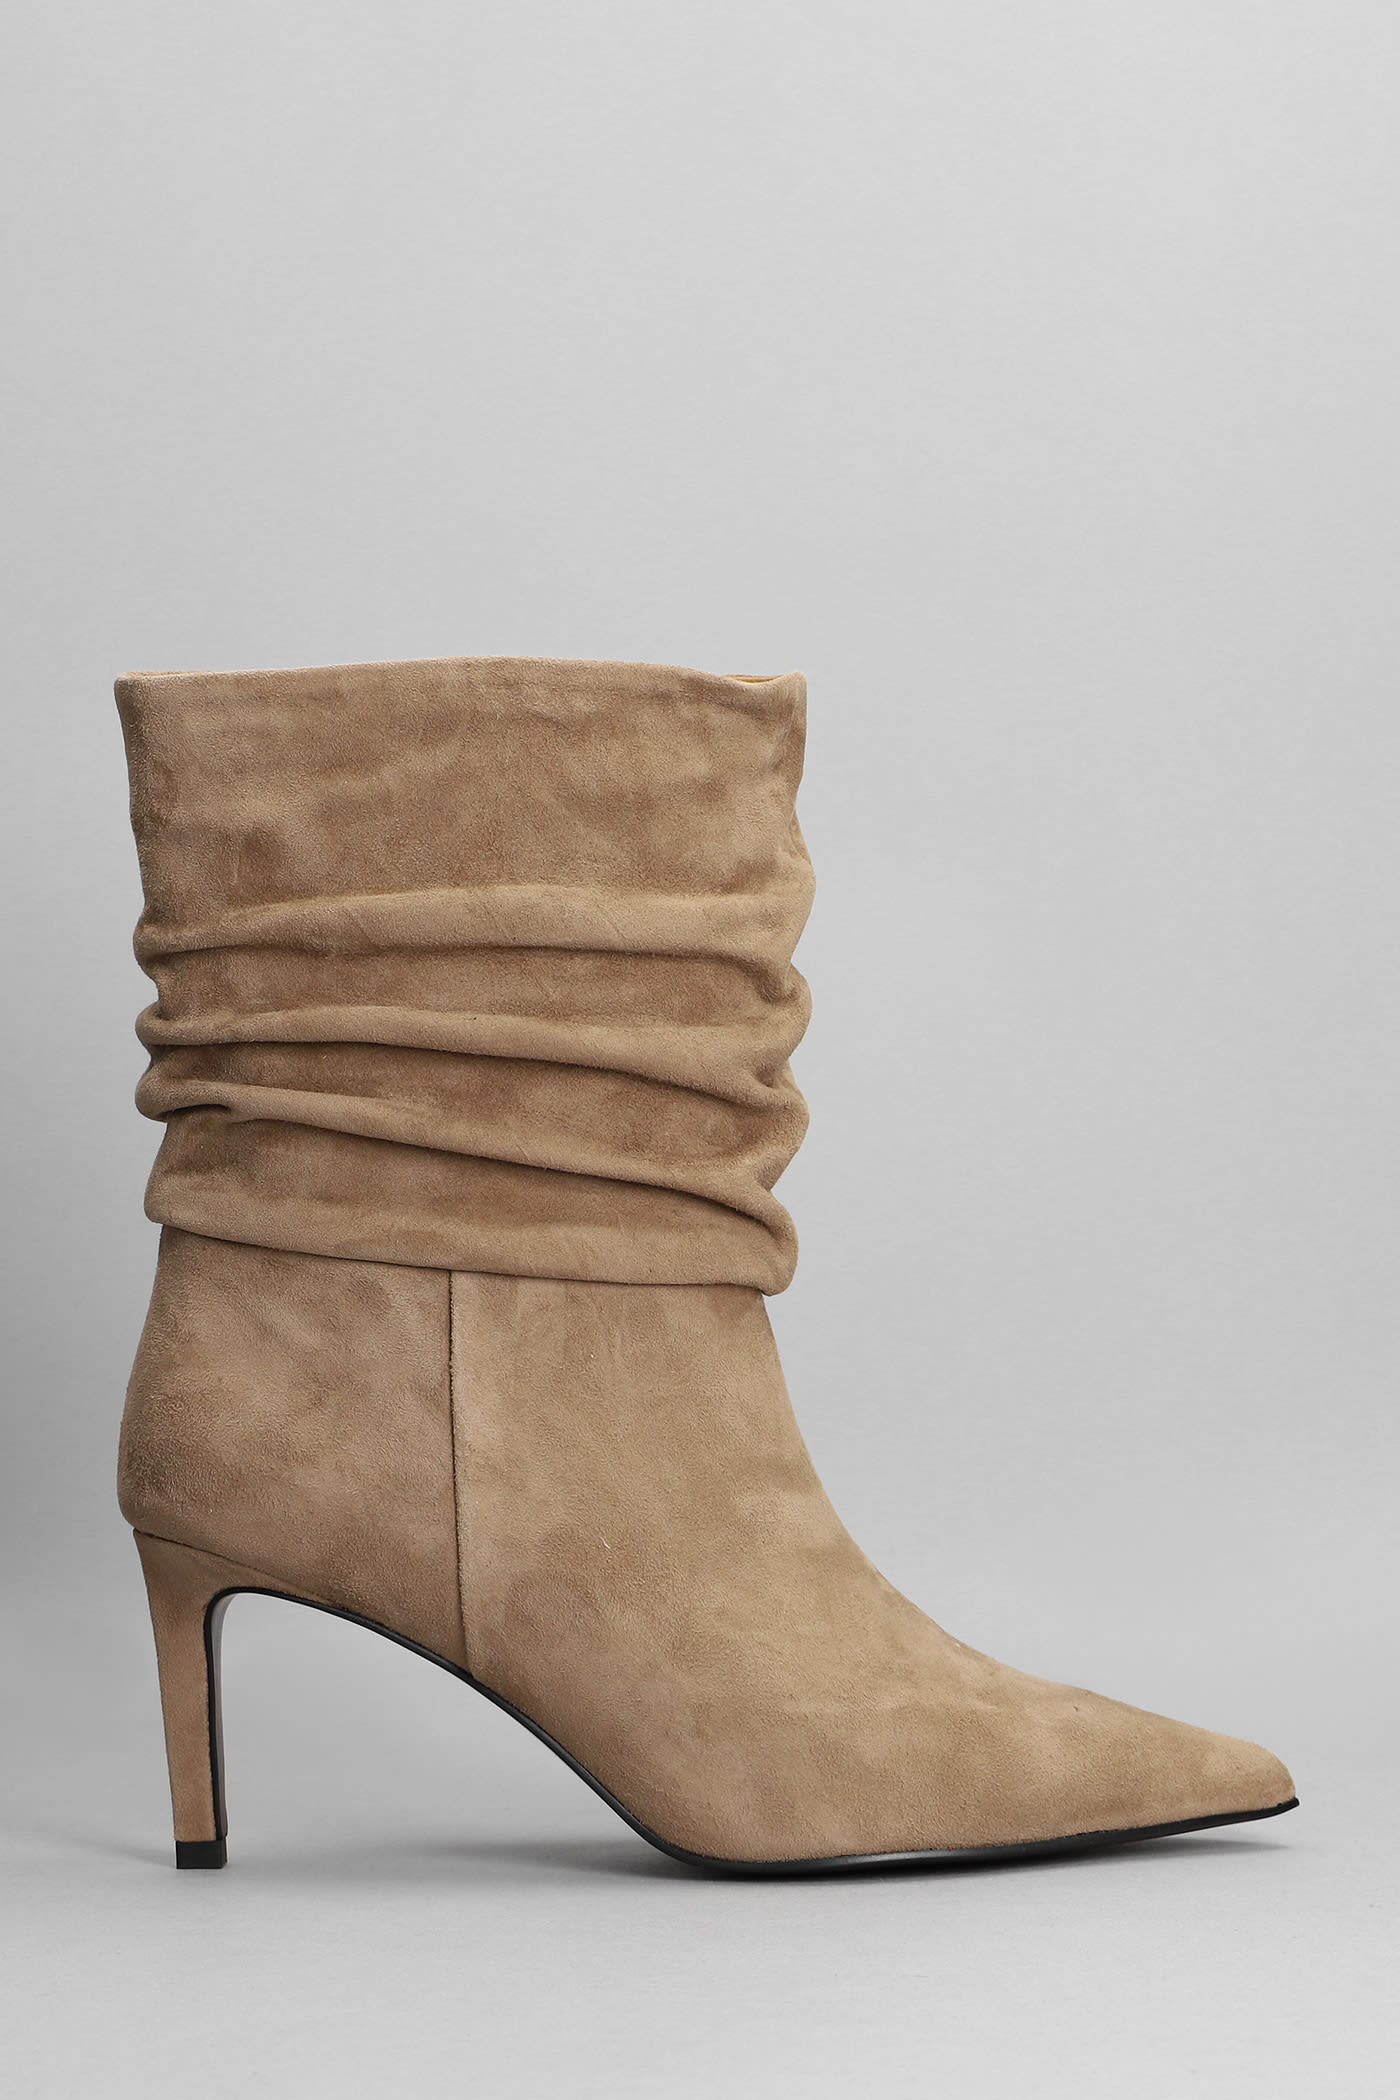 Bibi Lou High Heels Ankle Boots In Taupe Suede